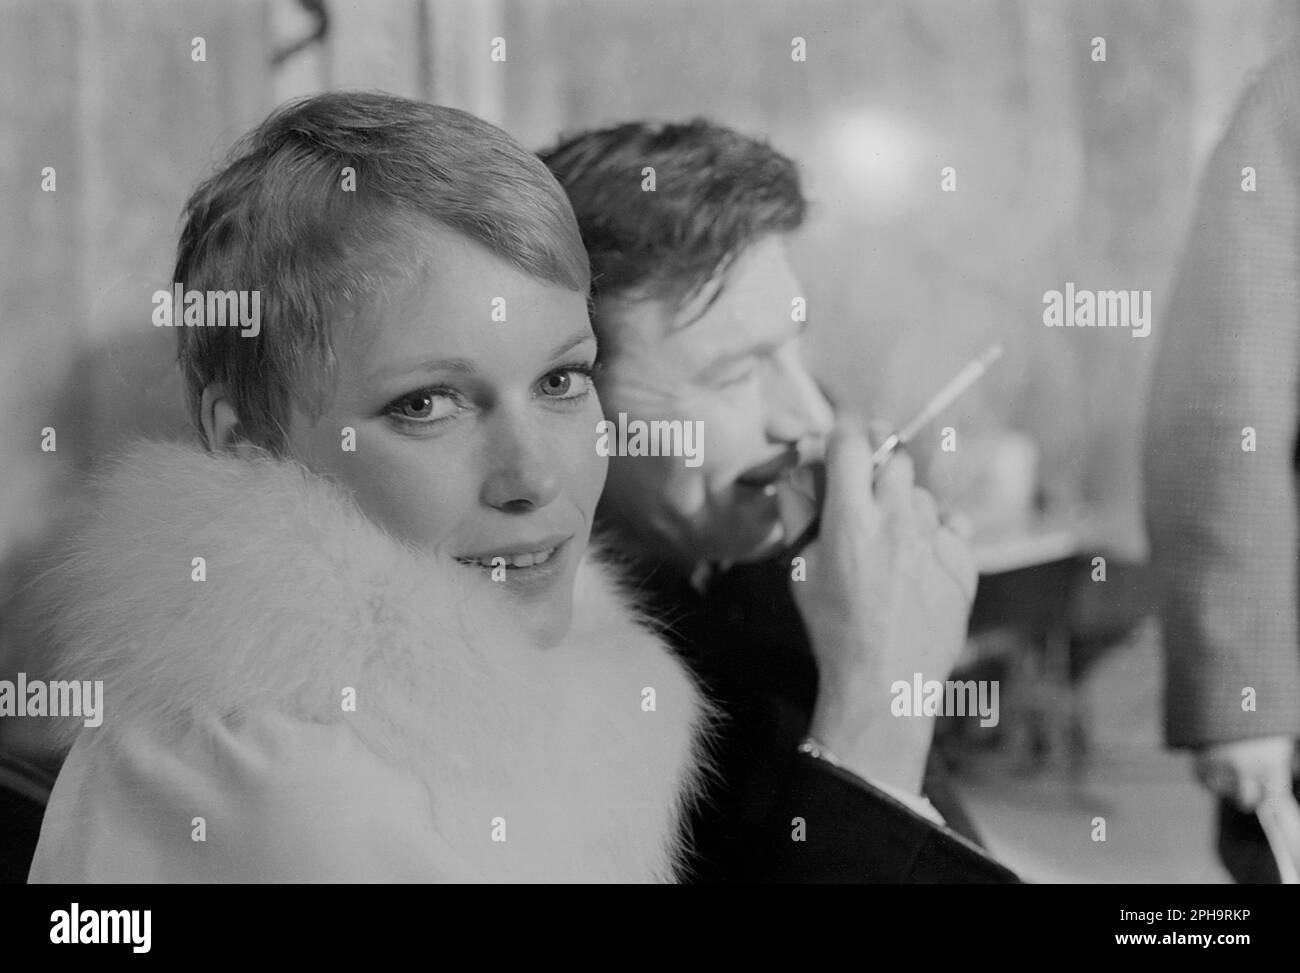 London. circa.1967. A photograph of Mia Farrow and Laurence Harvey inside the Café Royal, Regent Street in Piccadilly, London, taken behind the scenes during the filming of the neo-noir British spy movie, ‘A Dandy in Aspic’. The film was directed by Anthony Mann. Stock Photo